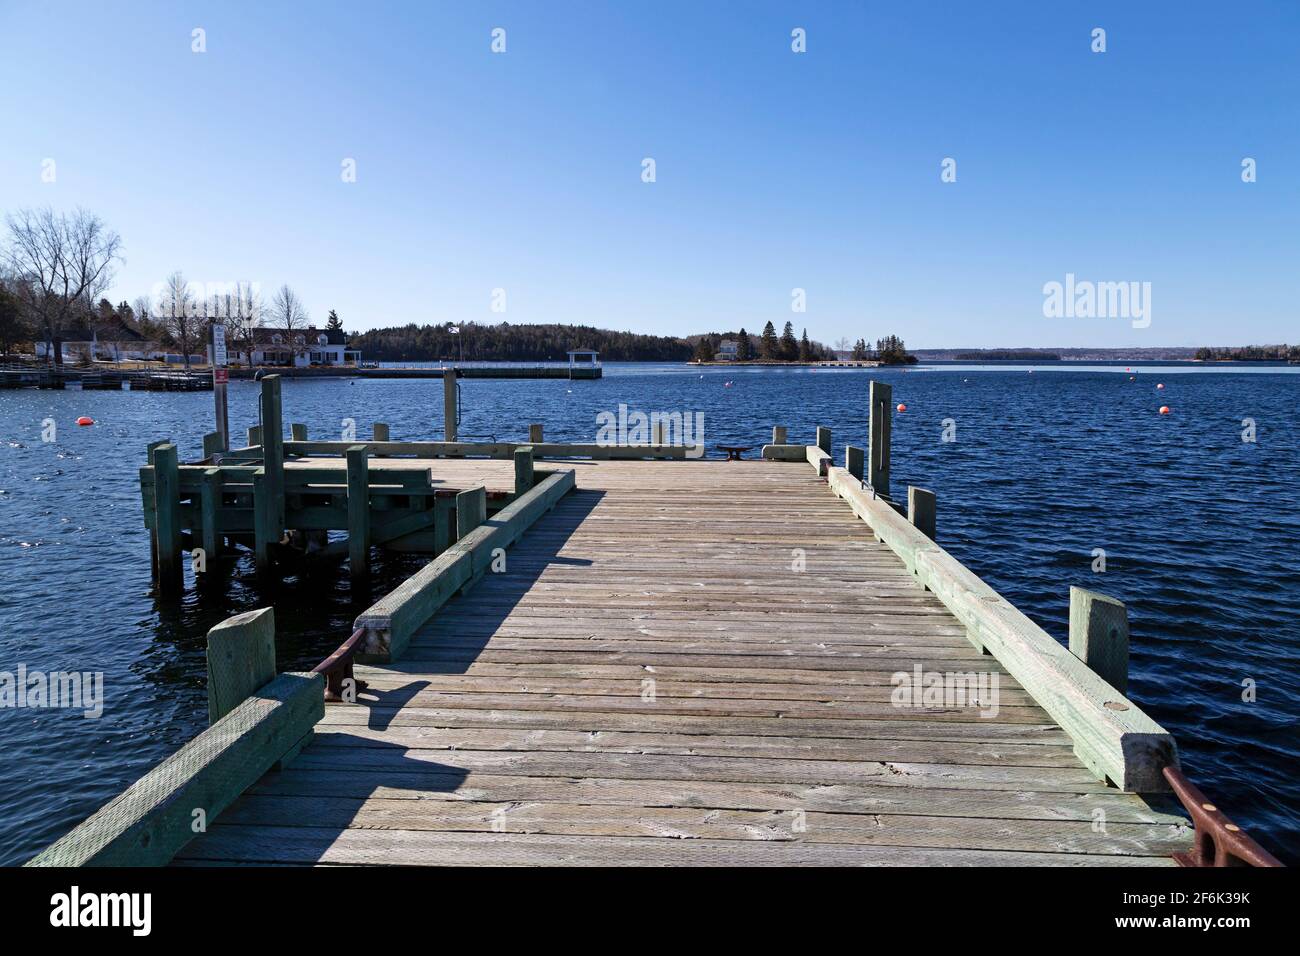 Wooden jetty at the waterfront in Chester, Nova Scotia, Canada. The jetty juts into the water of the harbour. Stock Photo